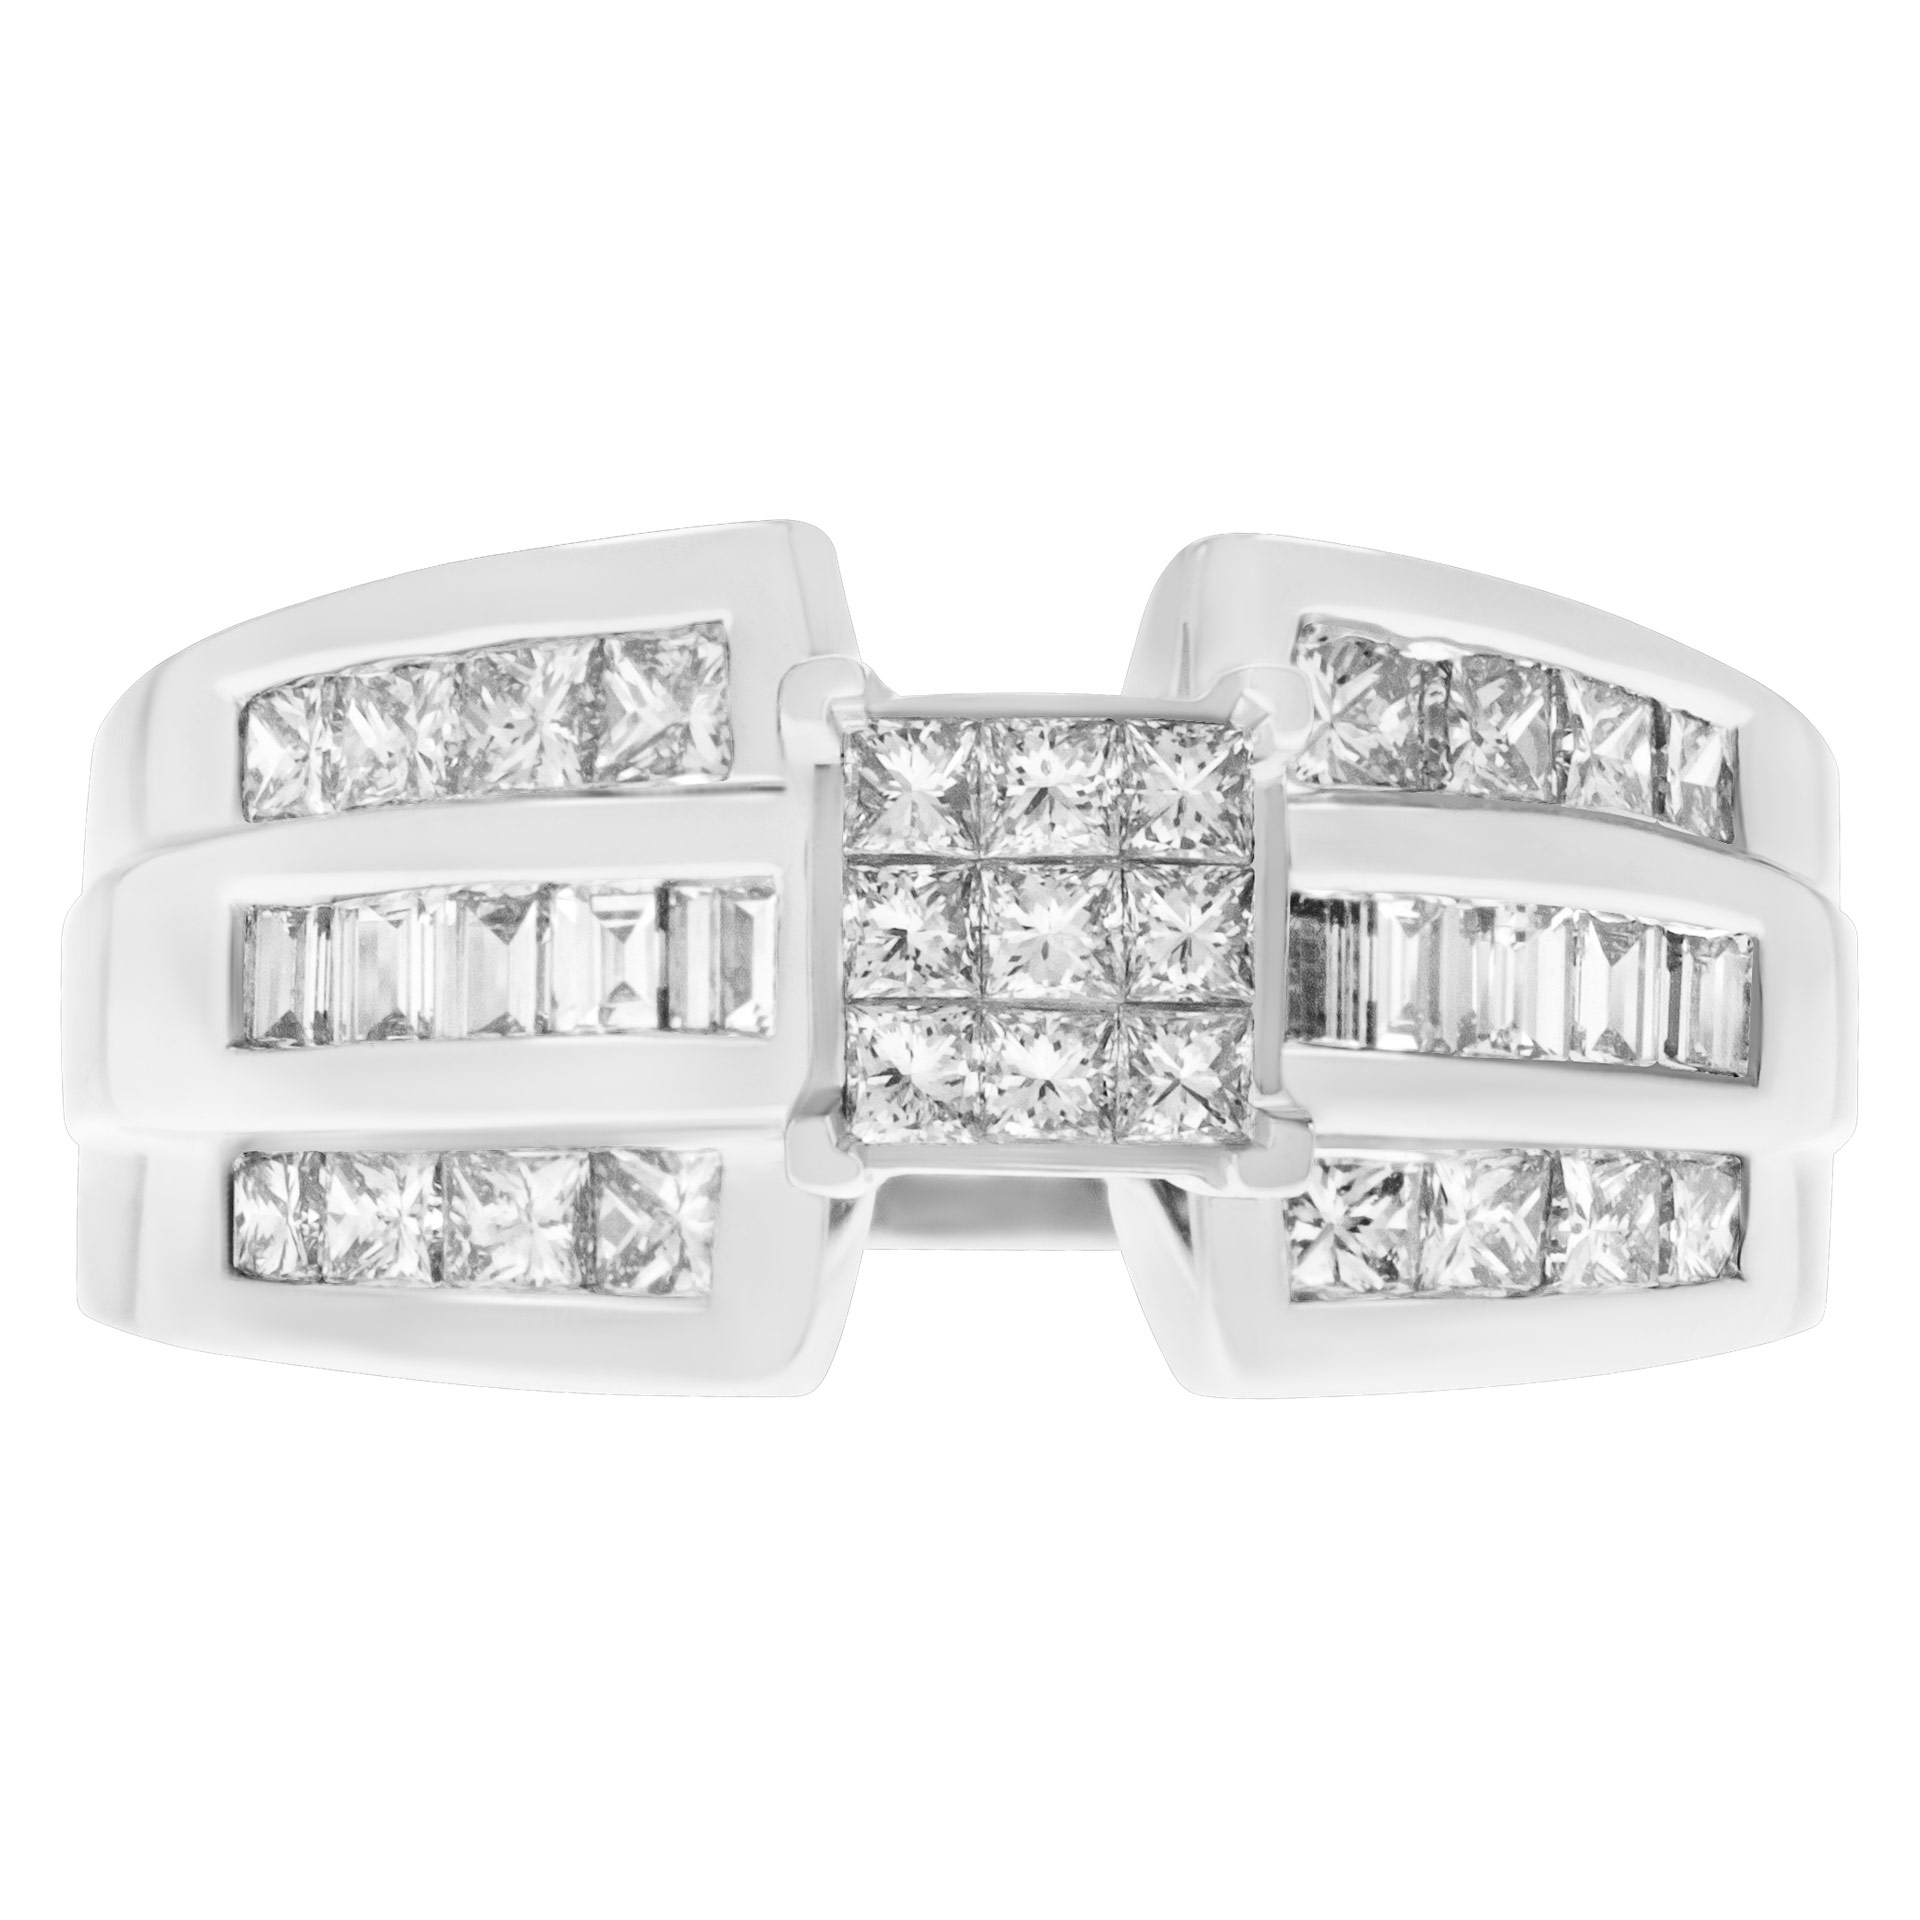 Diamond ring with 1.50 cts in white clean diamonds set in 14k white gold